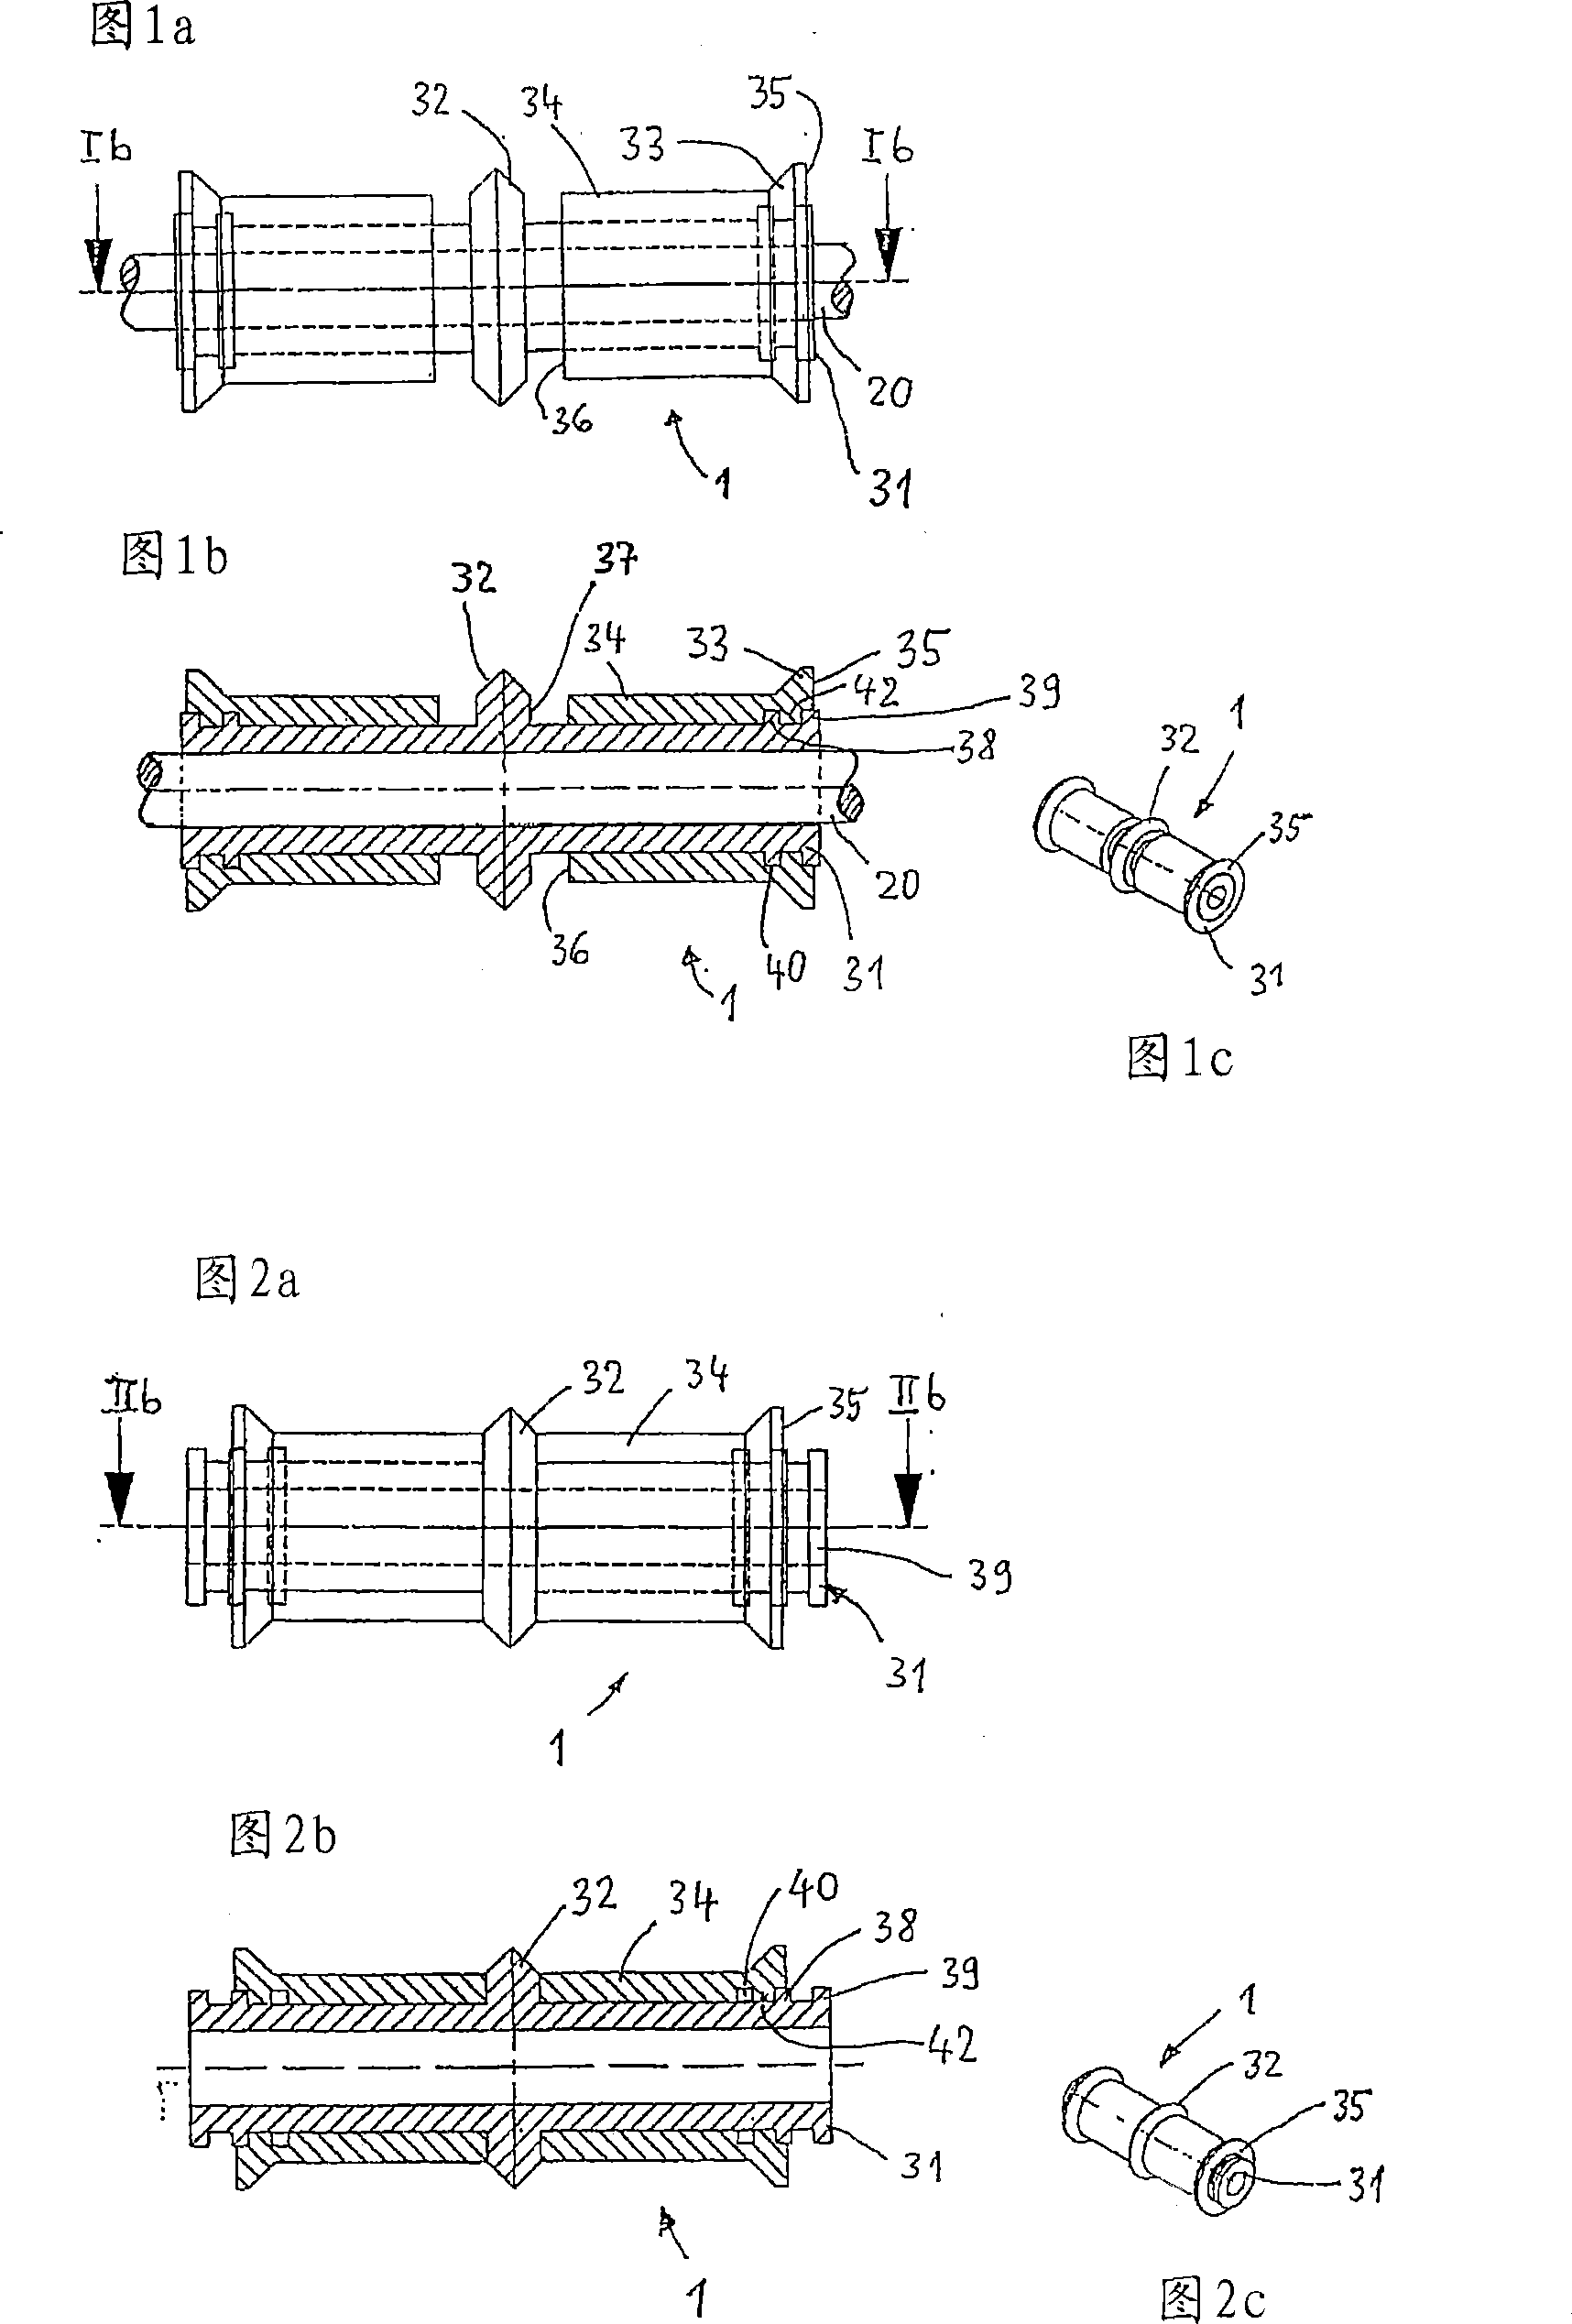 Applicator roll for a labeling apparatus